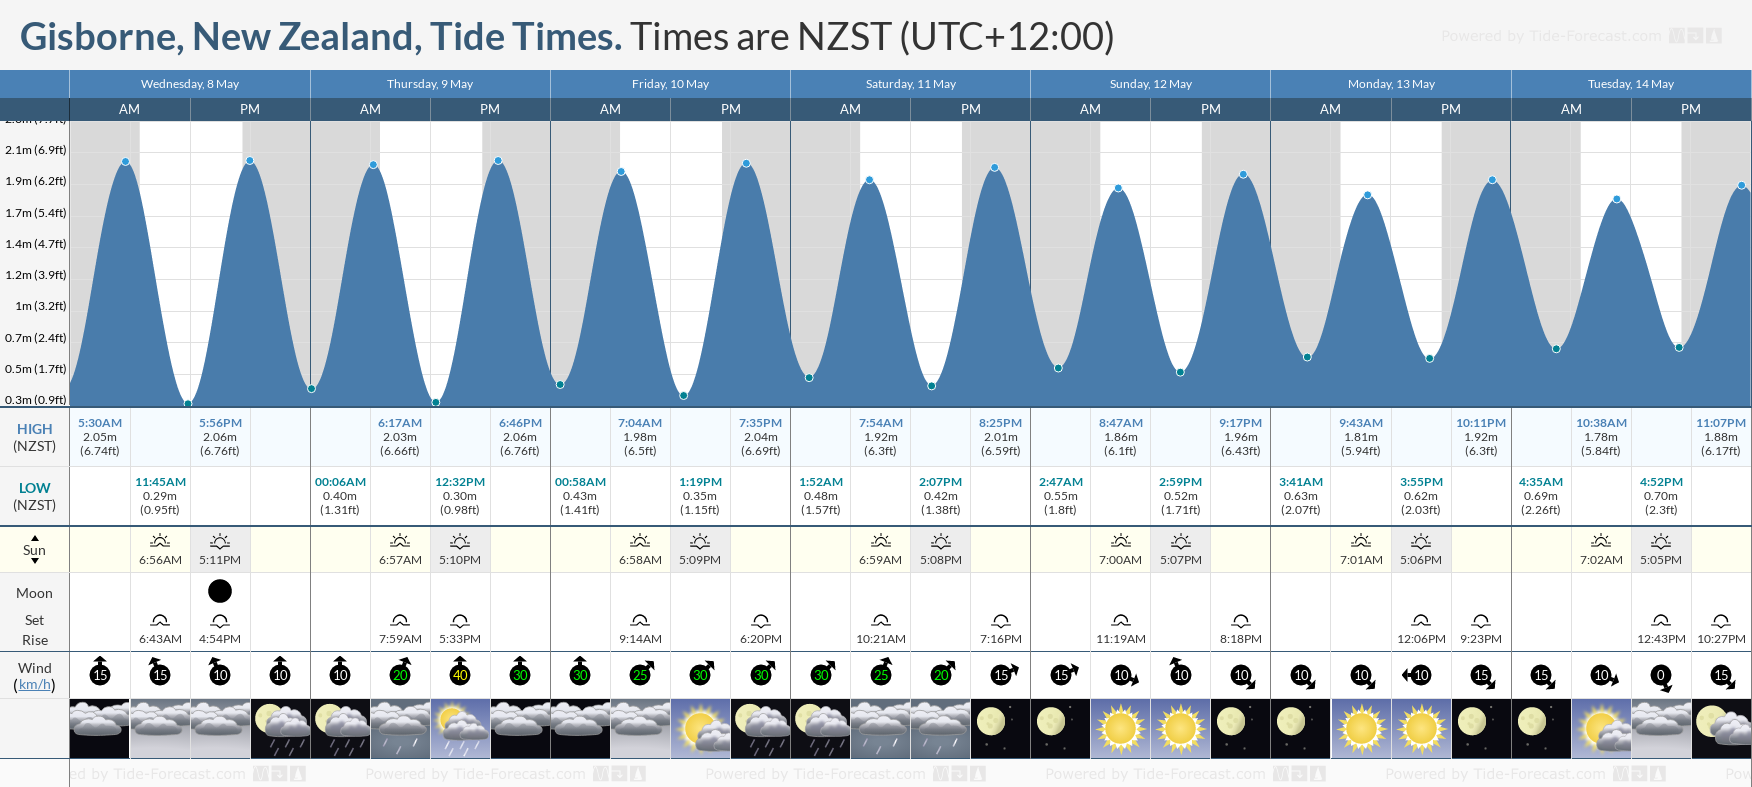 Gisborne, New Zealand Tide Chart including high and low tide tide times for the next 7 days